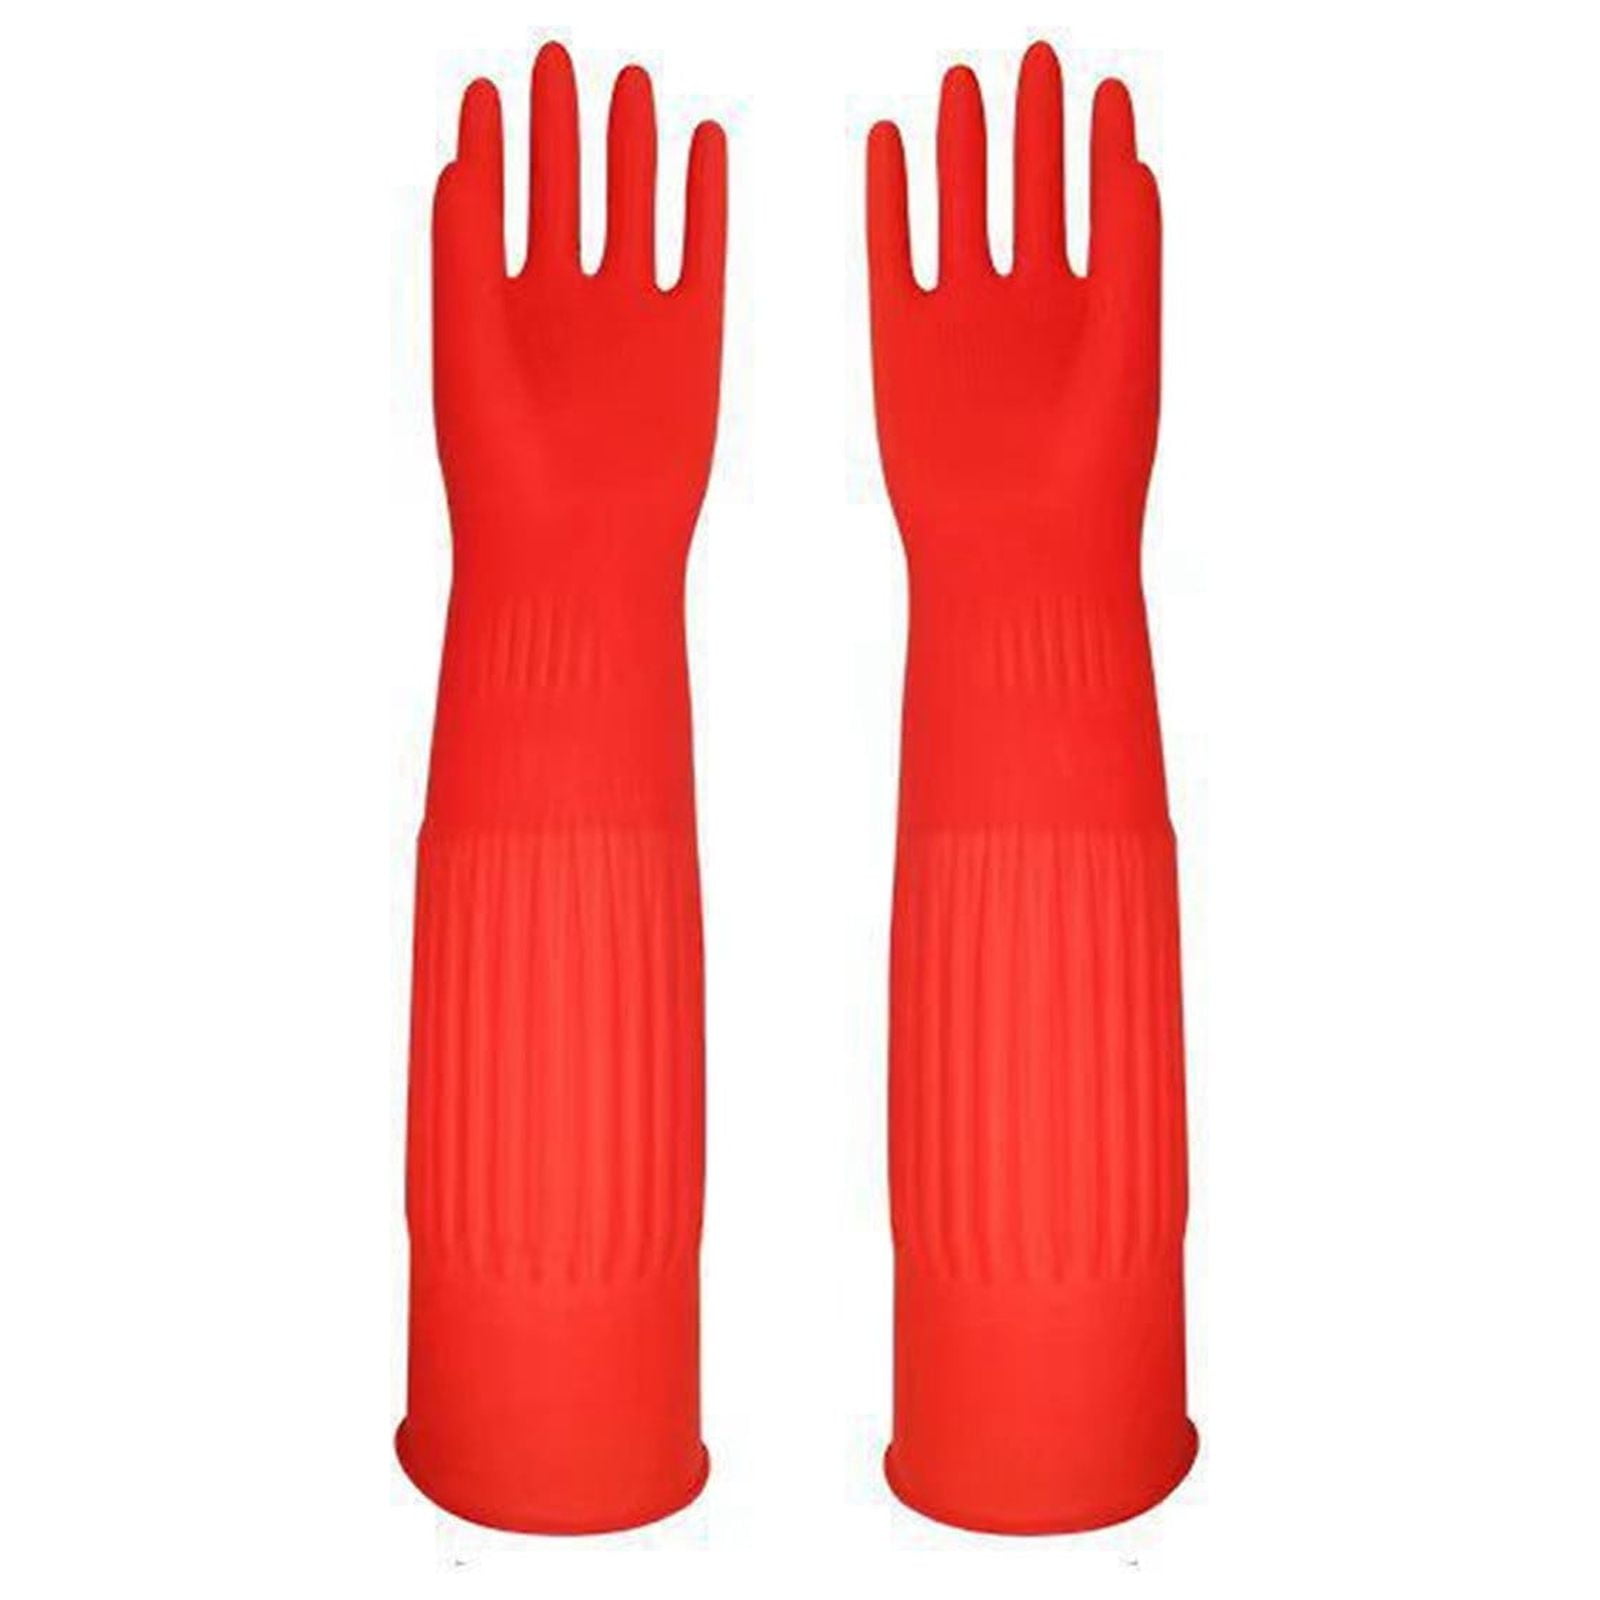 Home Disinfection Dust Removal Gloves🔥